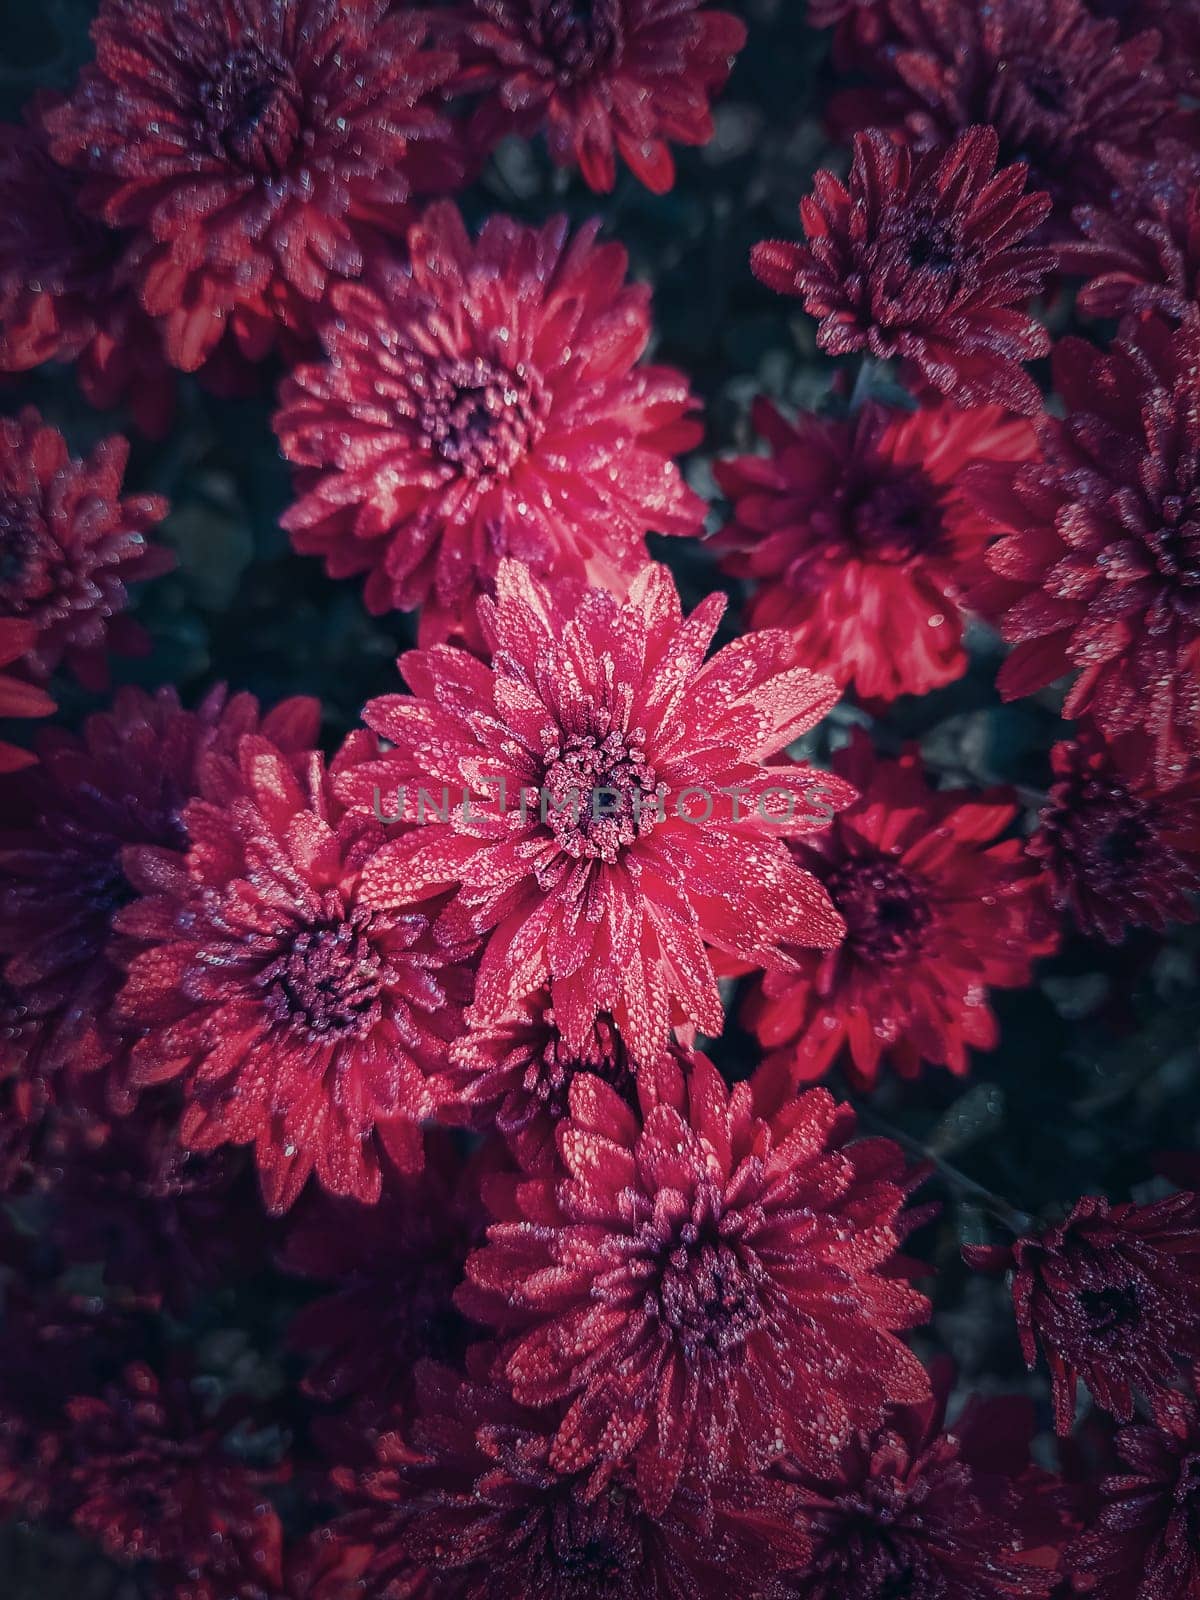 Top view red chrysanthemum texture. Beautiful flowers in the garden with morning dew drops on the petals. Maroon floral pattern